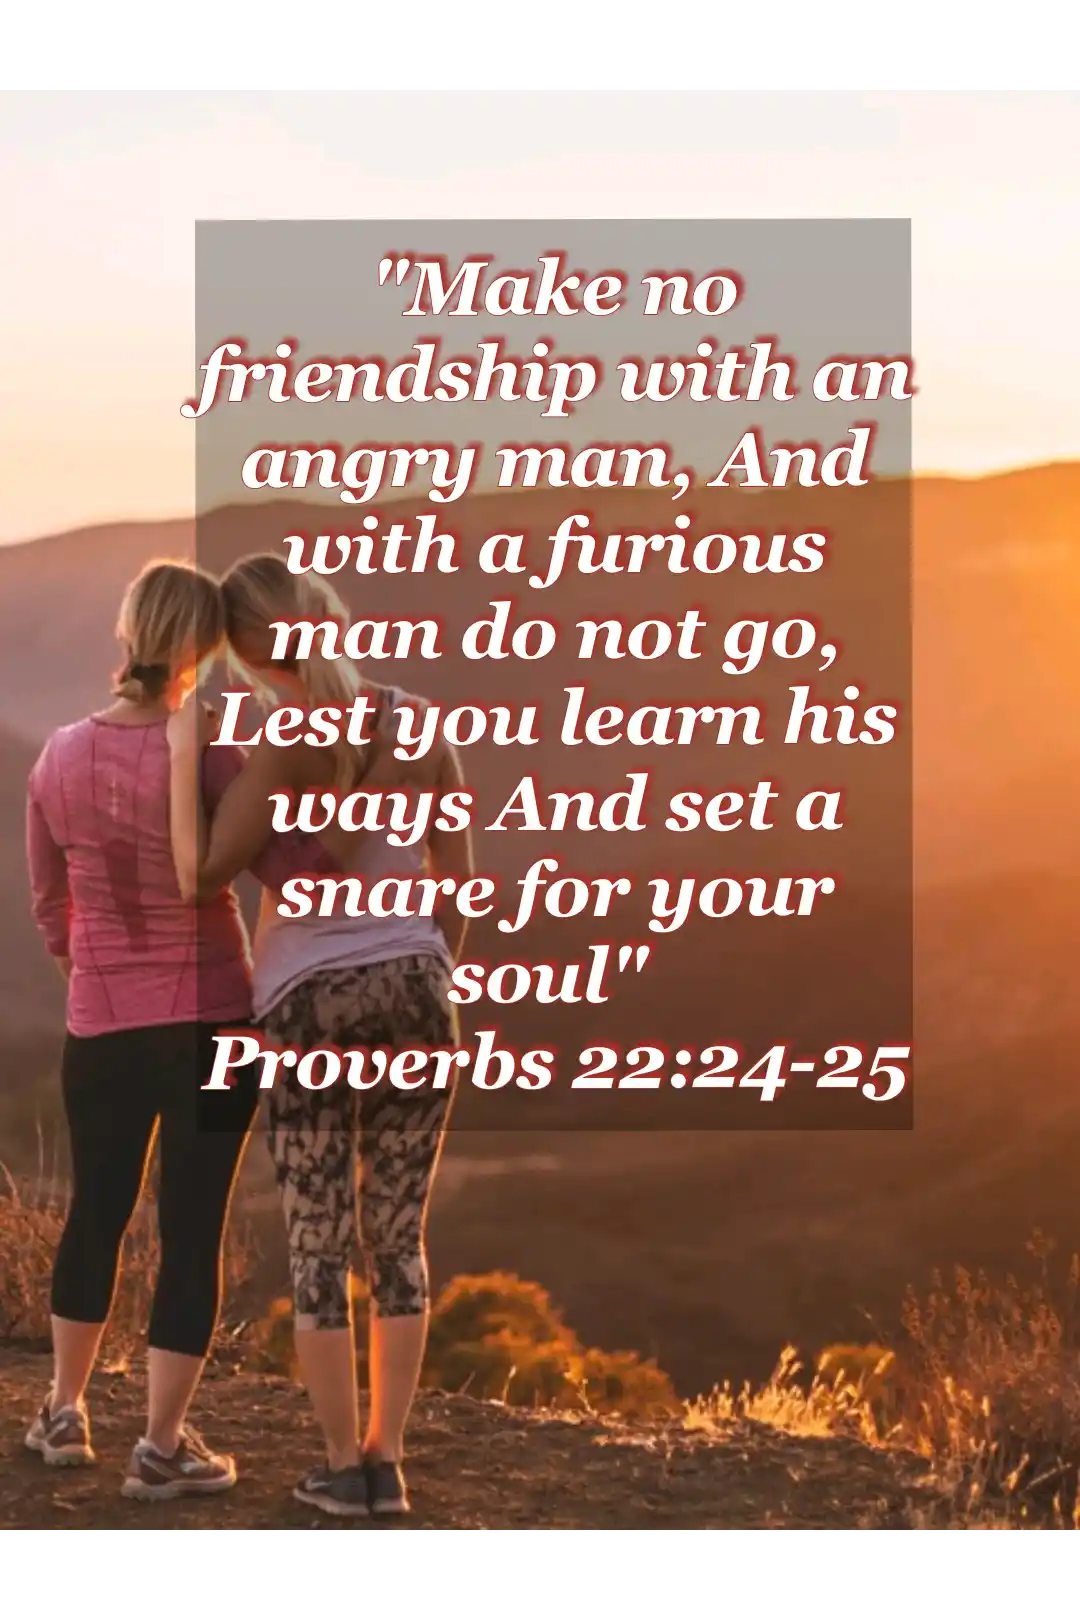 bibile-verses-about-friendship (Proverbs 22:24-25)